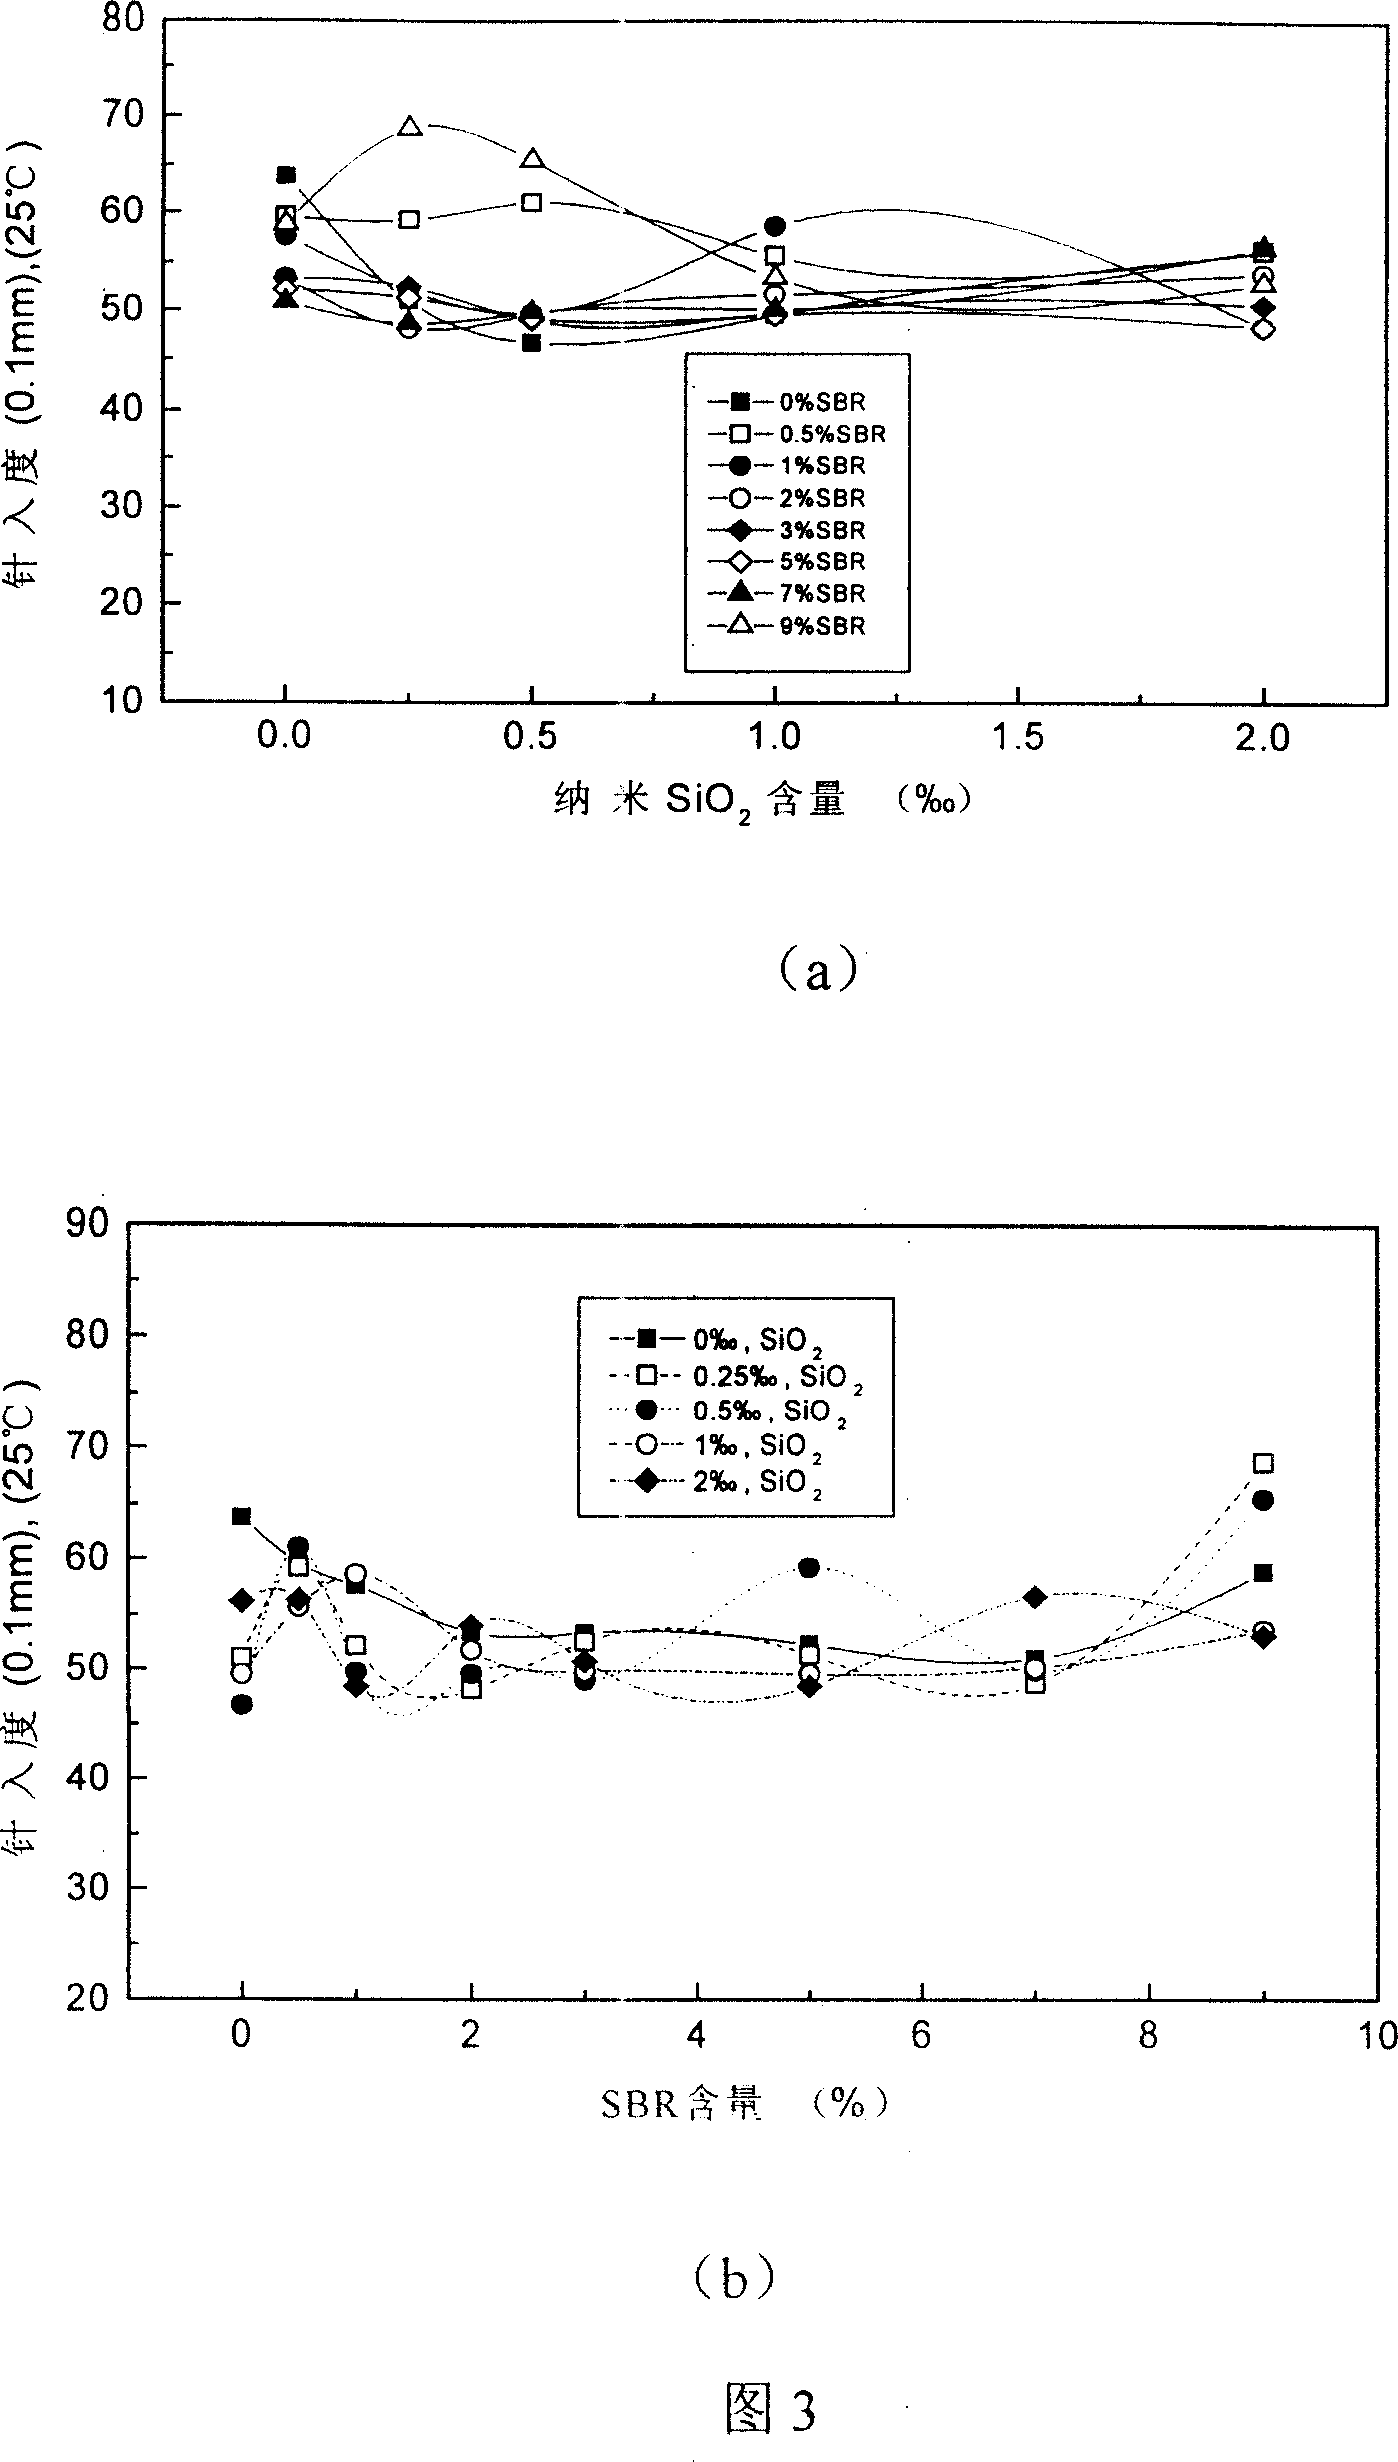 Inorganic nano particle and polymer composite modified emulsified asphalt